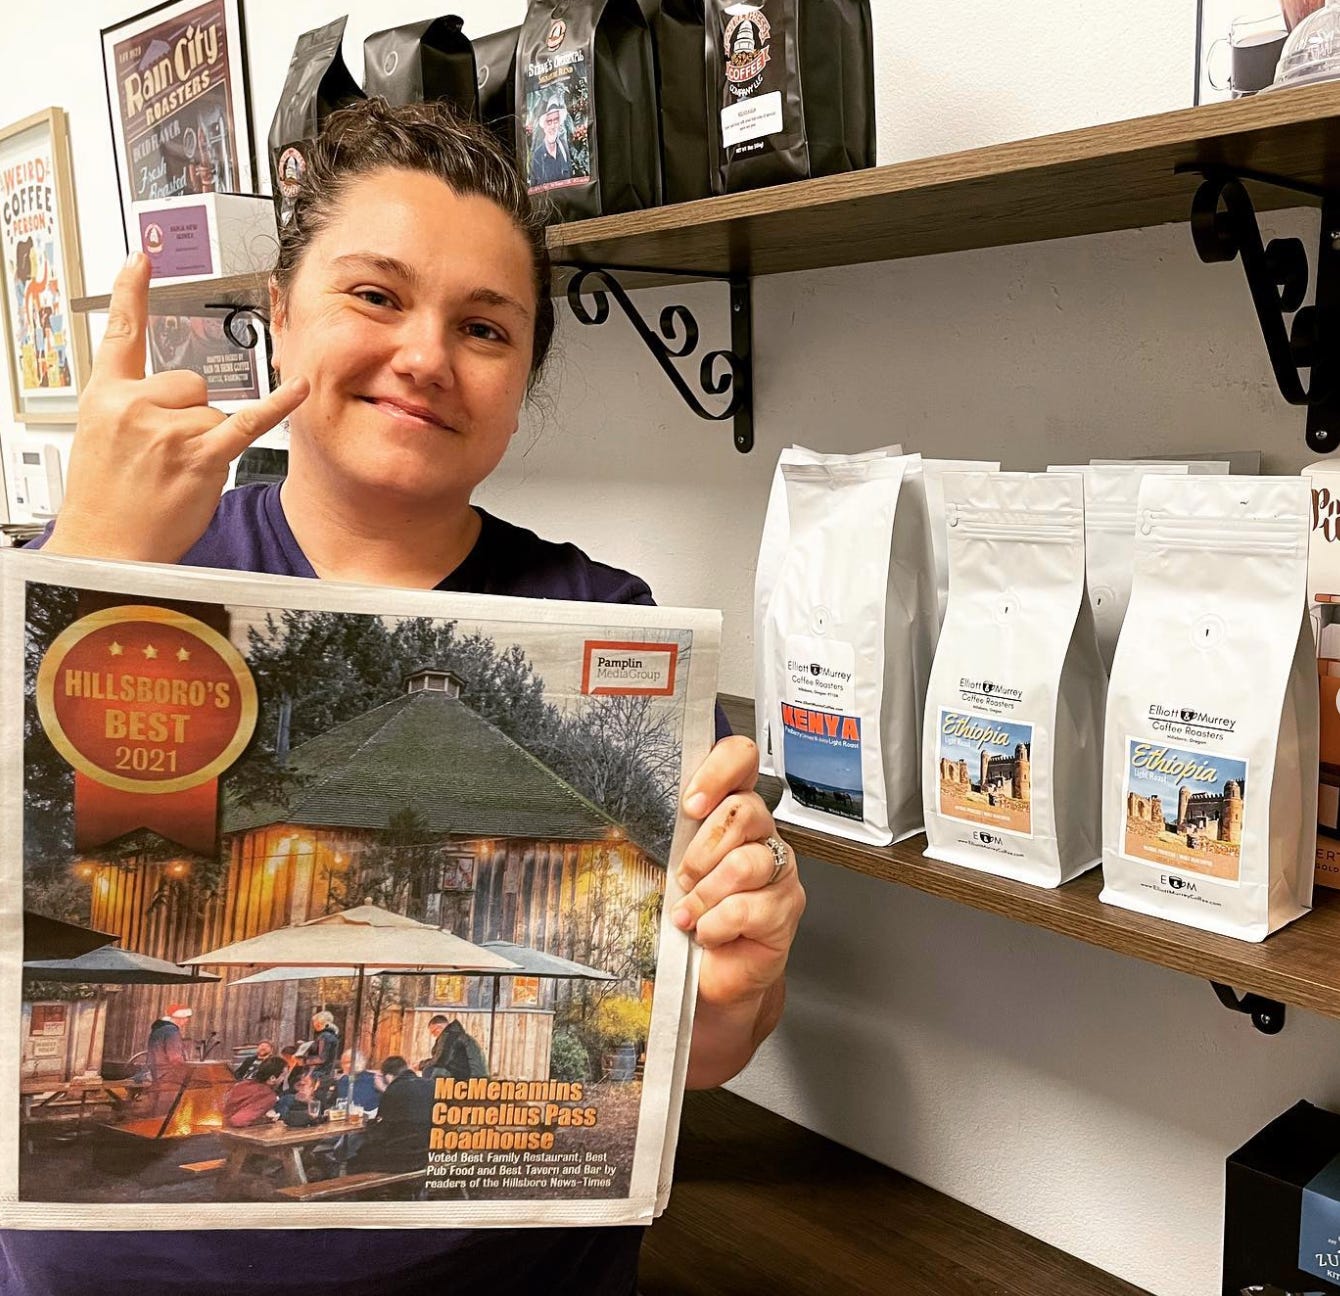 Keri Elliot flashes the rock n'roll horns hand signal while holding up a newspaper promoting her coffeeshops bronze medal for best coffeehouse in Hillsboro, Oregon while standing in from of shelves filled with coffee bags.